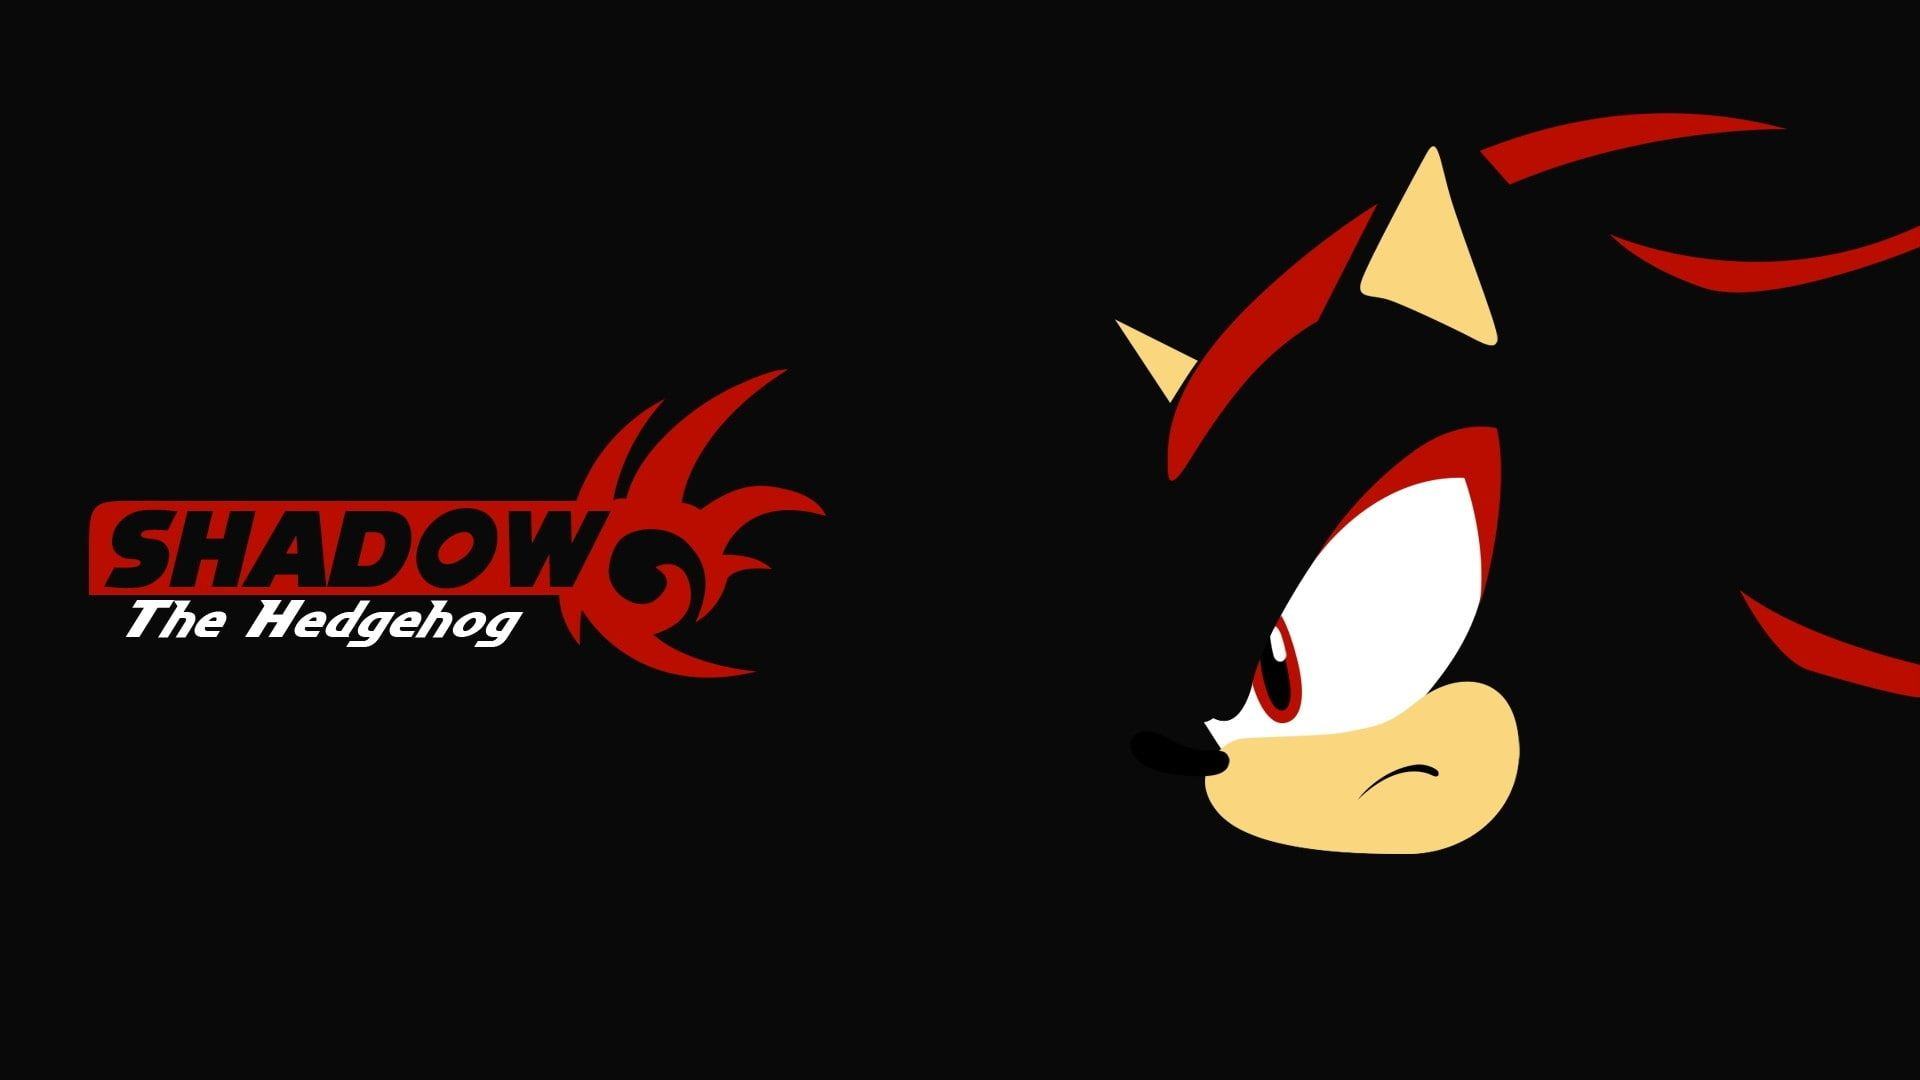 1920x1080 sonic shadow the hedgehog Video Games Sonic HD Art #sonic shadow the hedgehog #1080P #wallpaper #hdw&acirc;&#128;&brvbar; | Shadow the hedgehog, Sonic and shadow, Wallpaper backgrounds